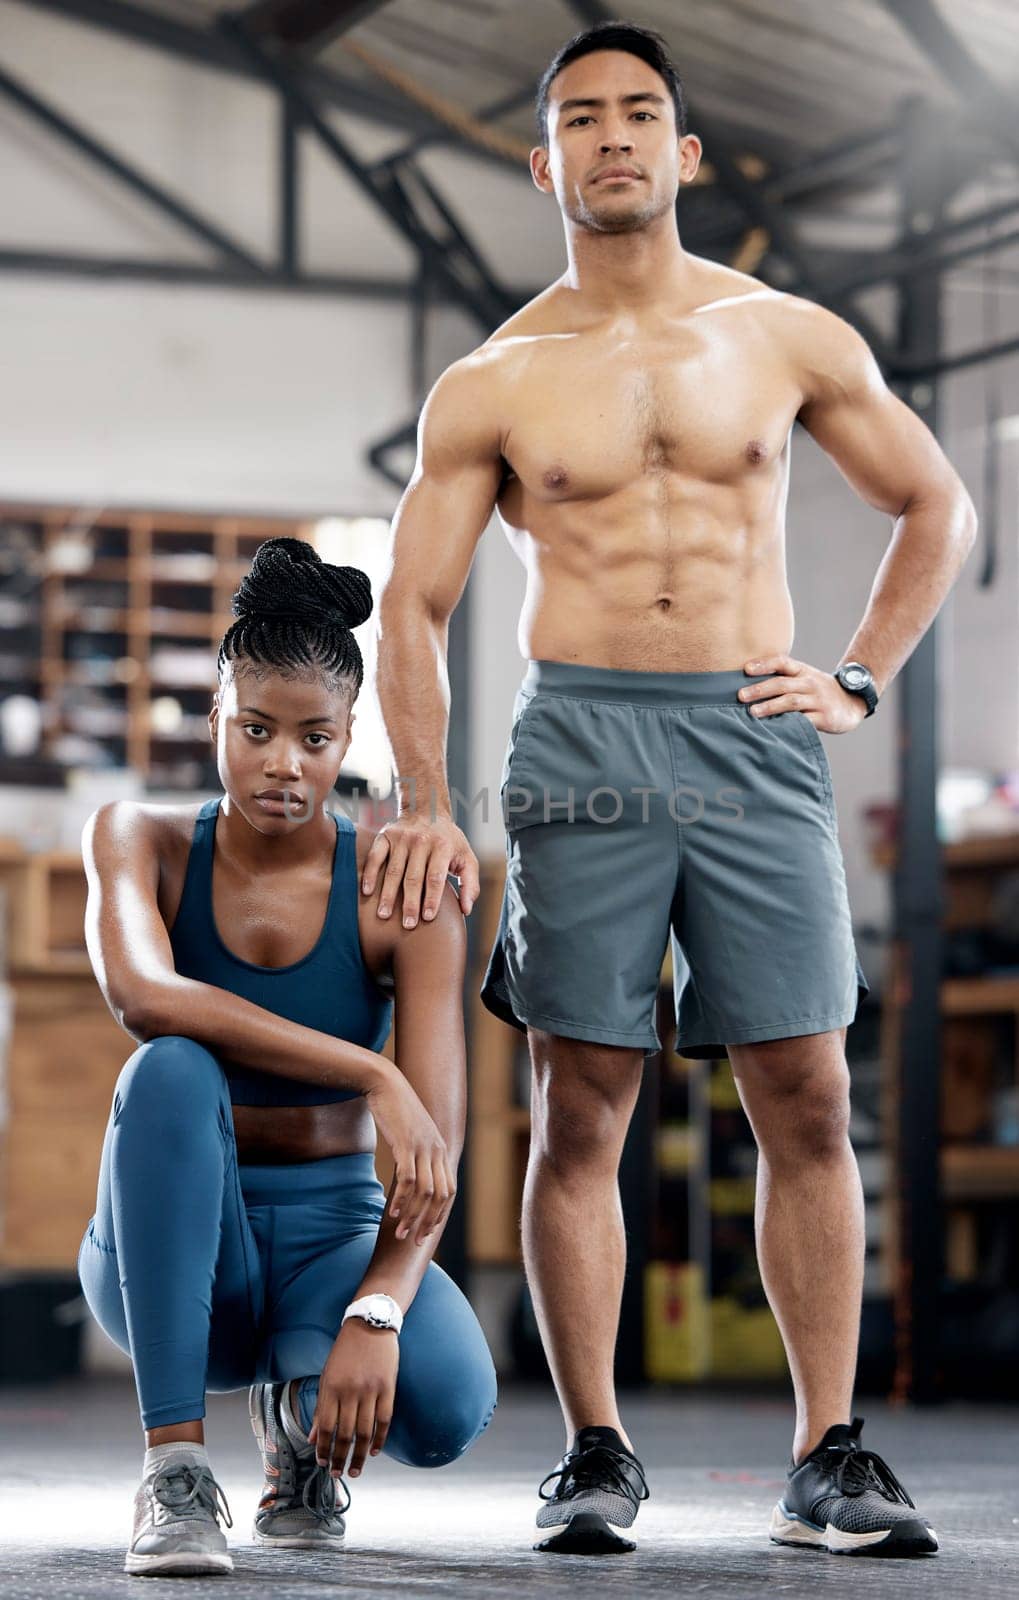 Fitness, portrait or coach with a black woman at a gym training, exercise or body workout. Team partnership, personal trainer or African client with pride in health club to start exercising activity.